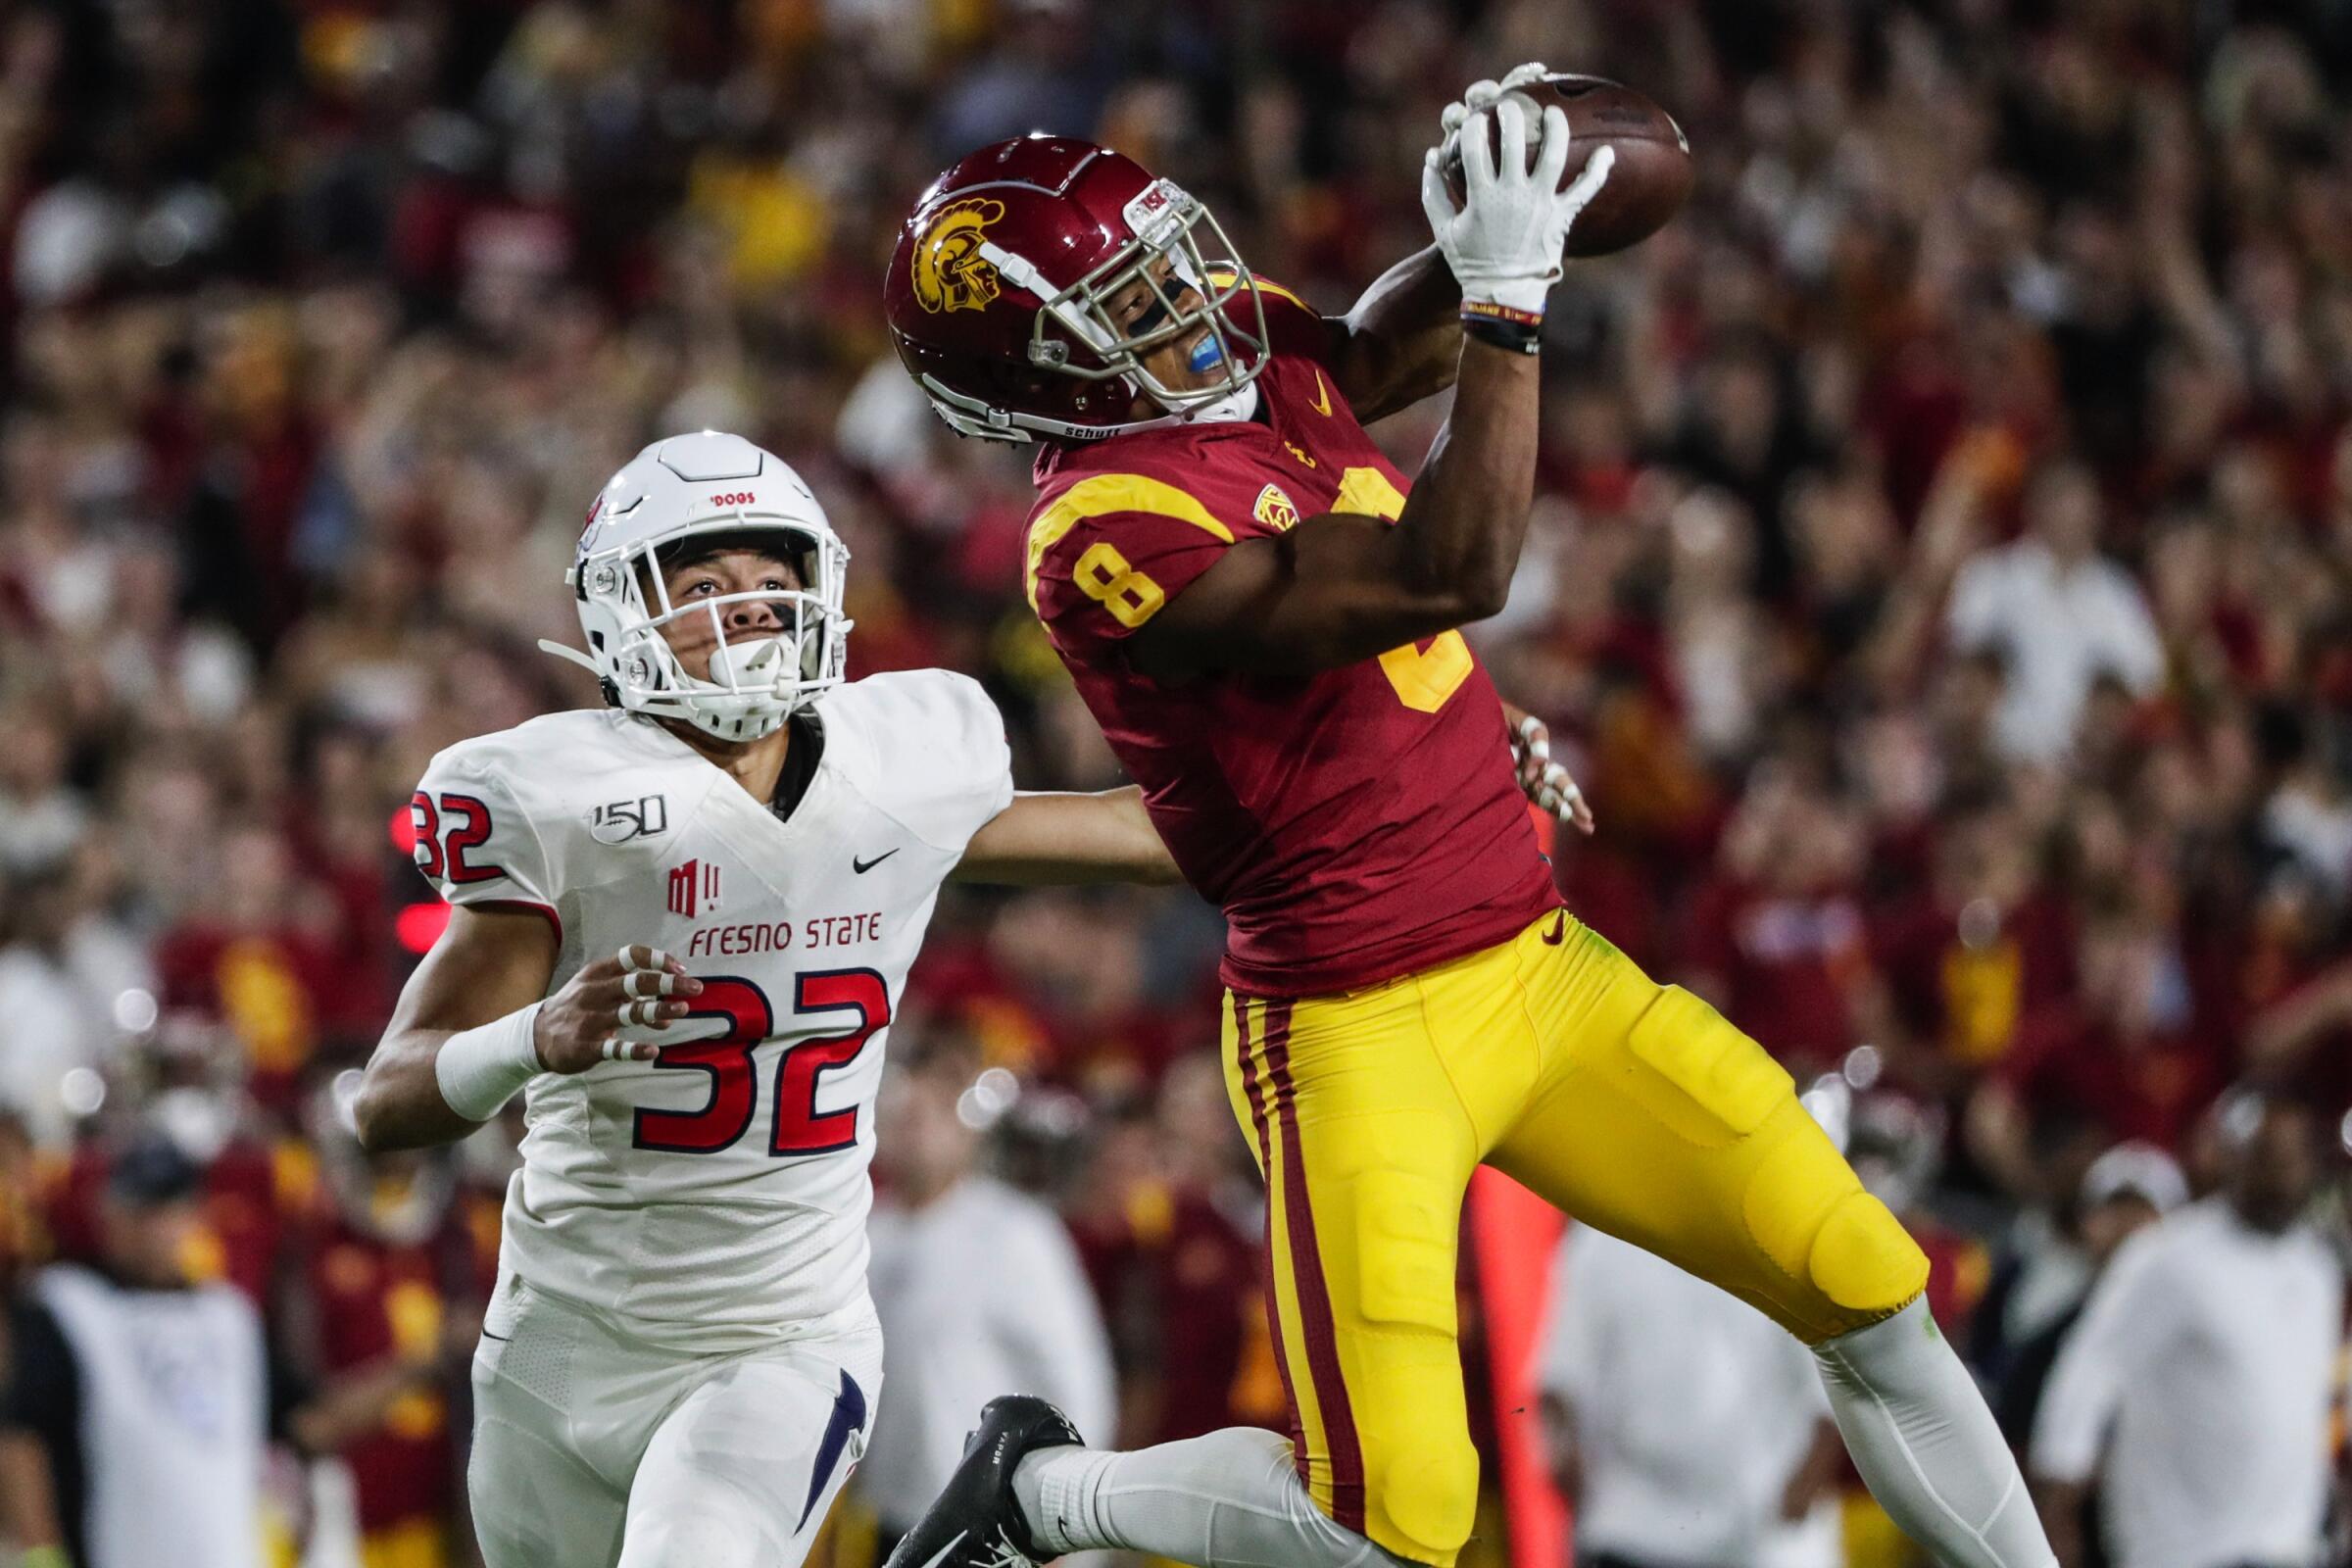 USC wide receiver Amon-ra St. Brown makes a catch against Fresno State in September 2019.